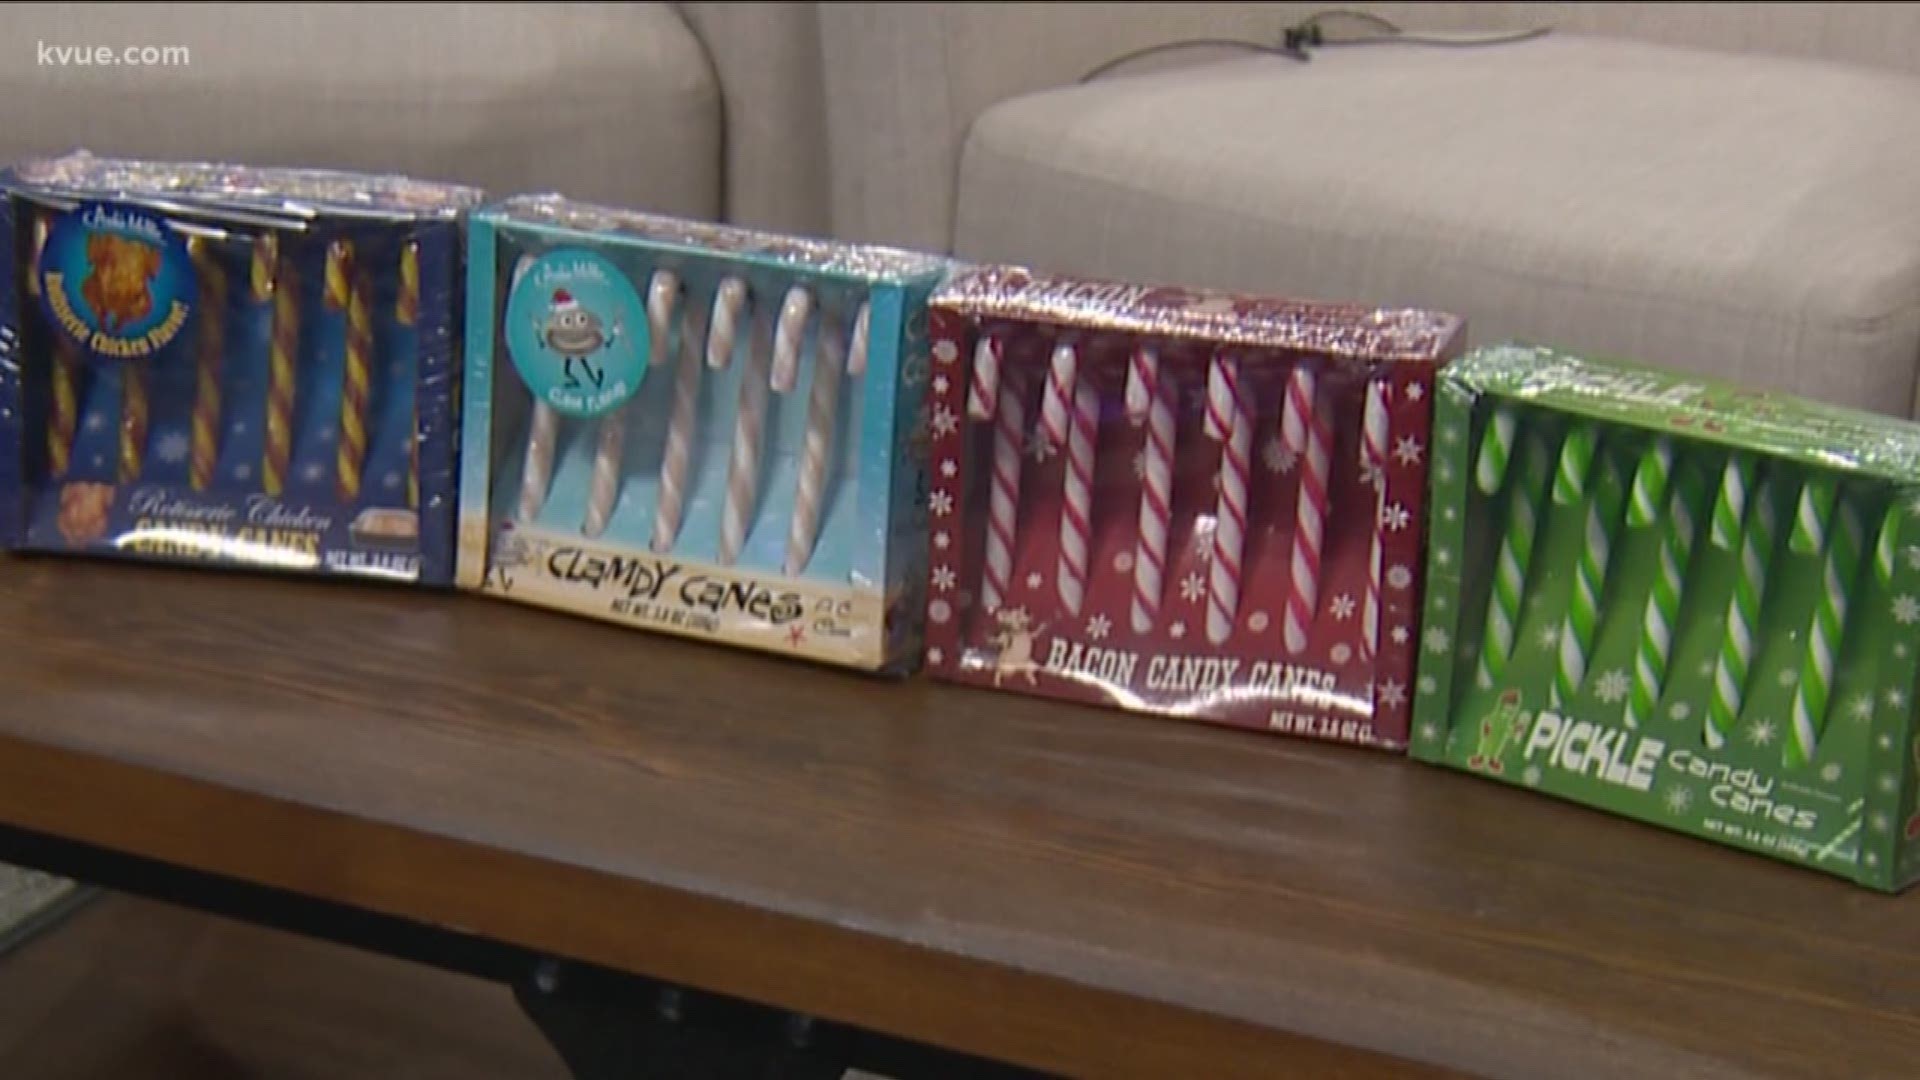 On tonight's Does It Work Wednesday, KVUE's Quita Culpepper found candy canes that could become a holiday tradition...or not.